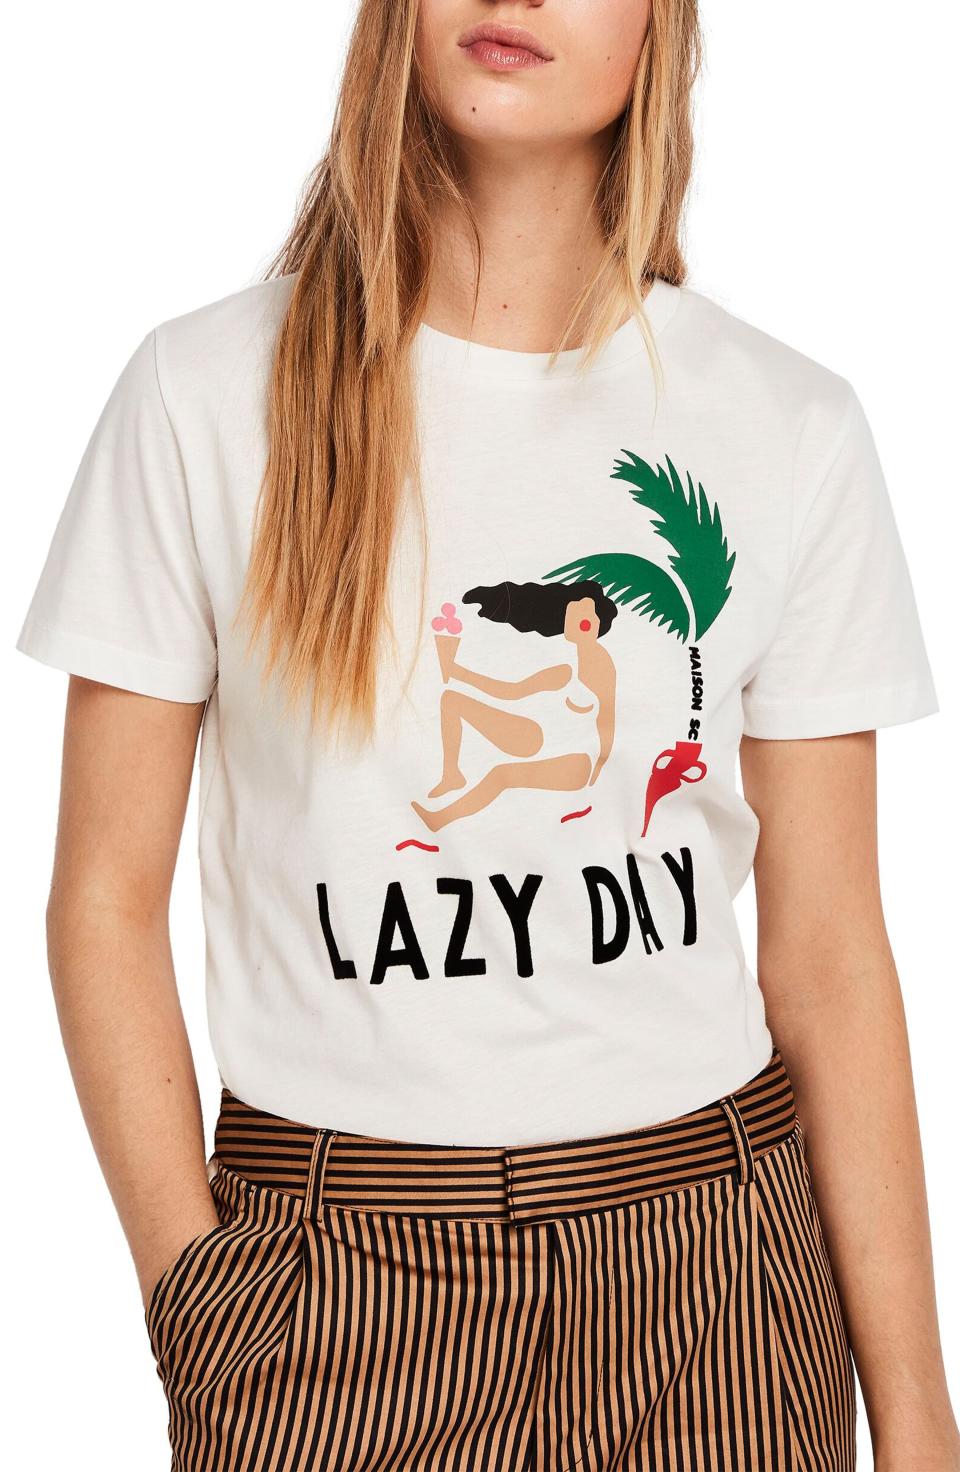 Lazy Day Graphic Tee